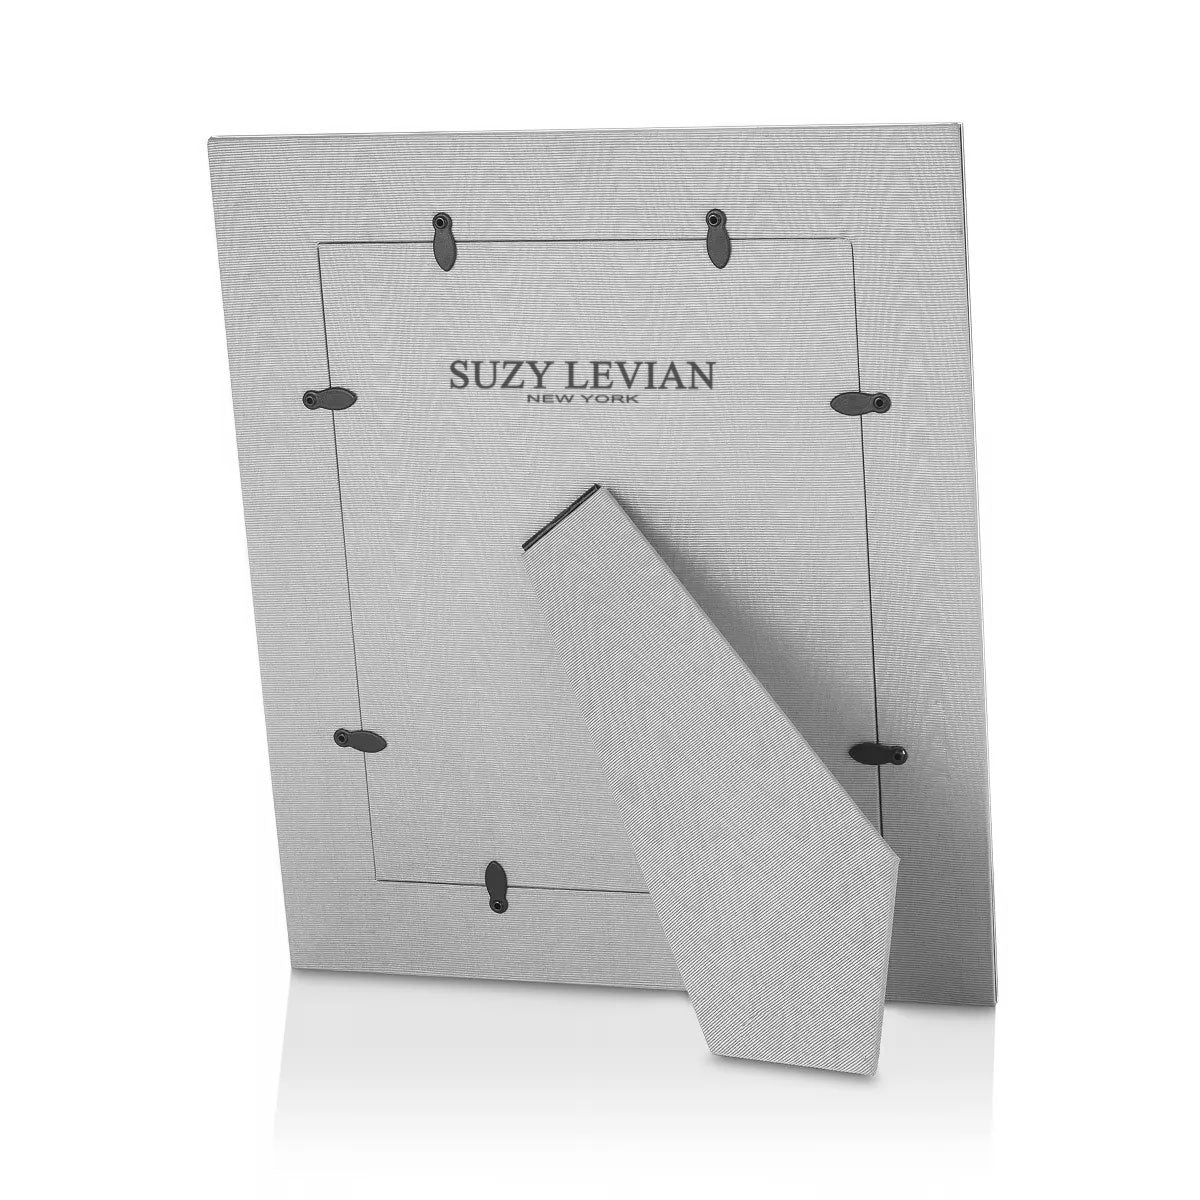 Suzy Levian New York Silver Picture Frame with Pink Orchid - Large